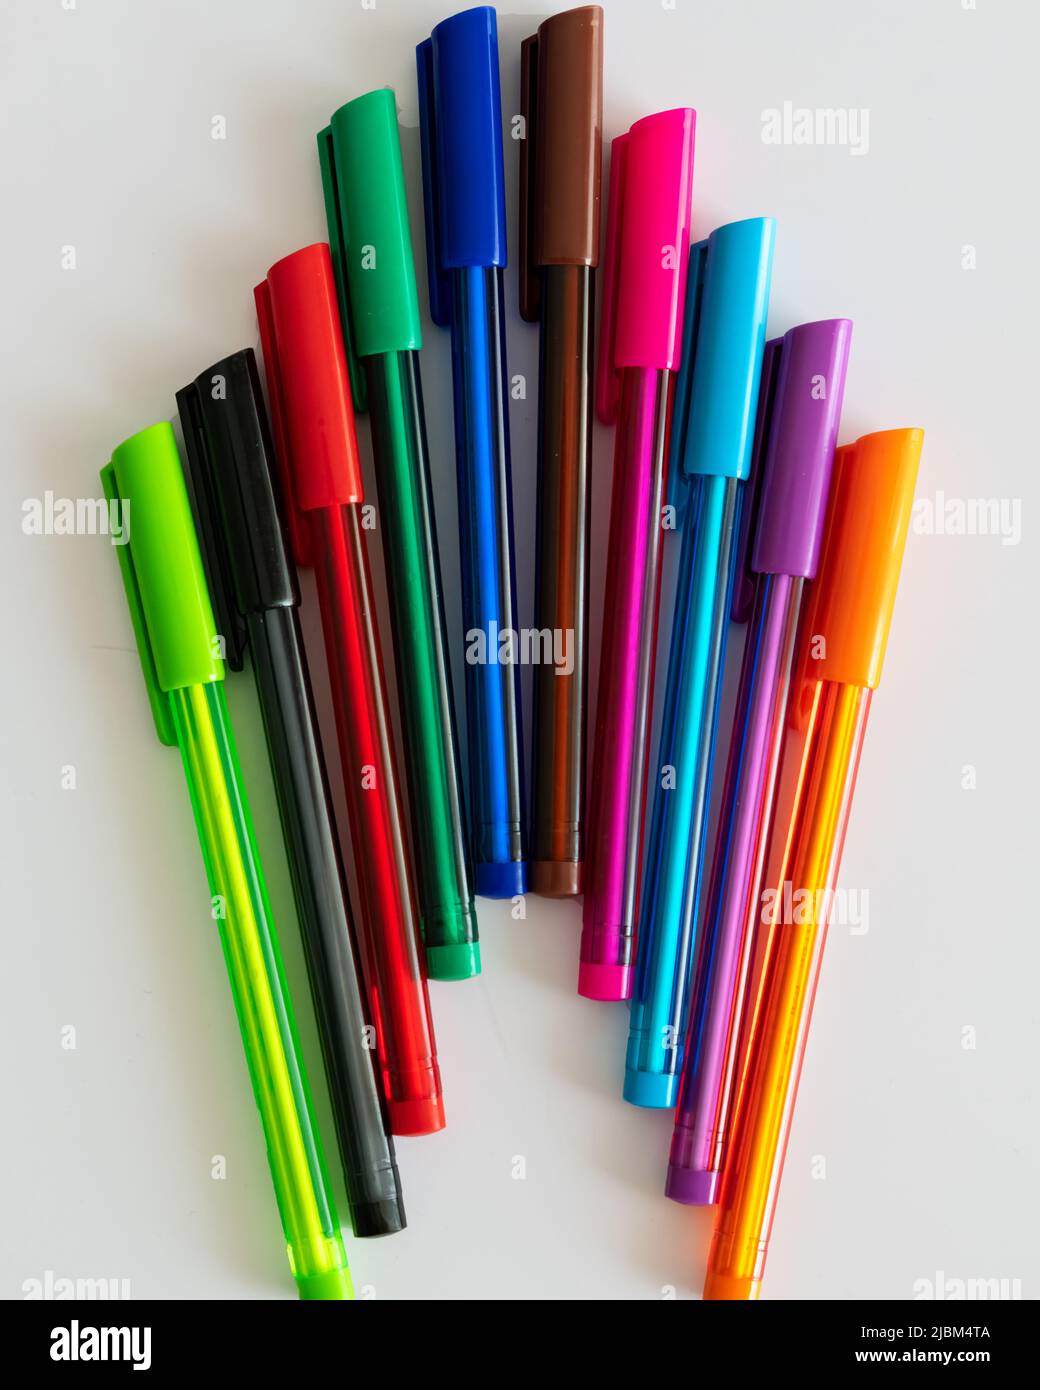 Colorful plastic ballpoint writing pens isolated on a white background. Stock Photo